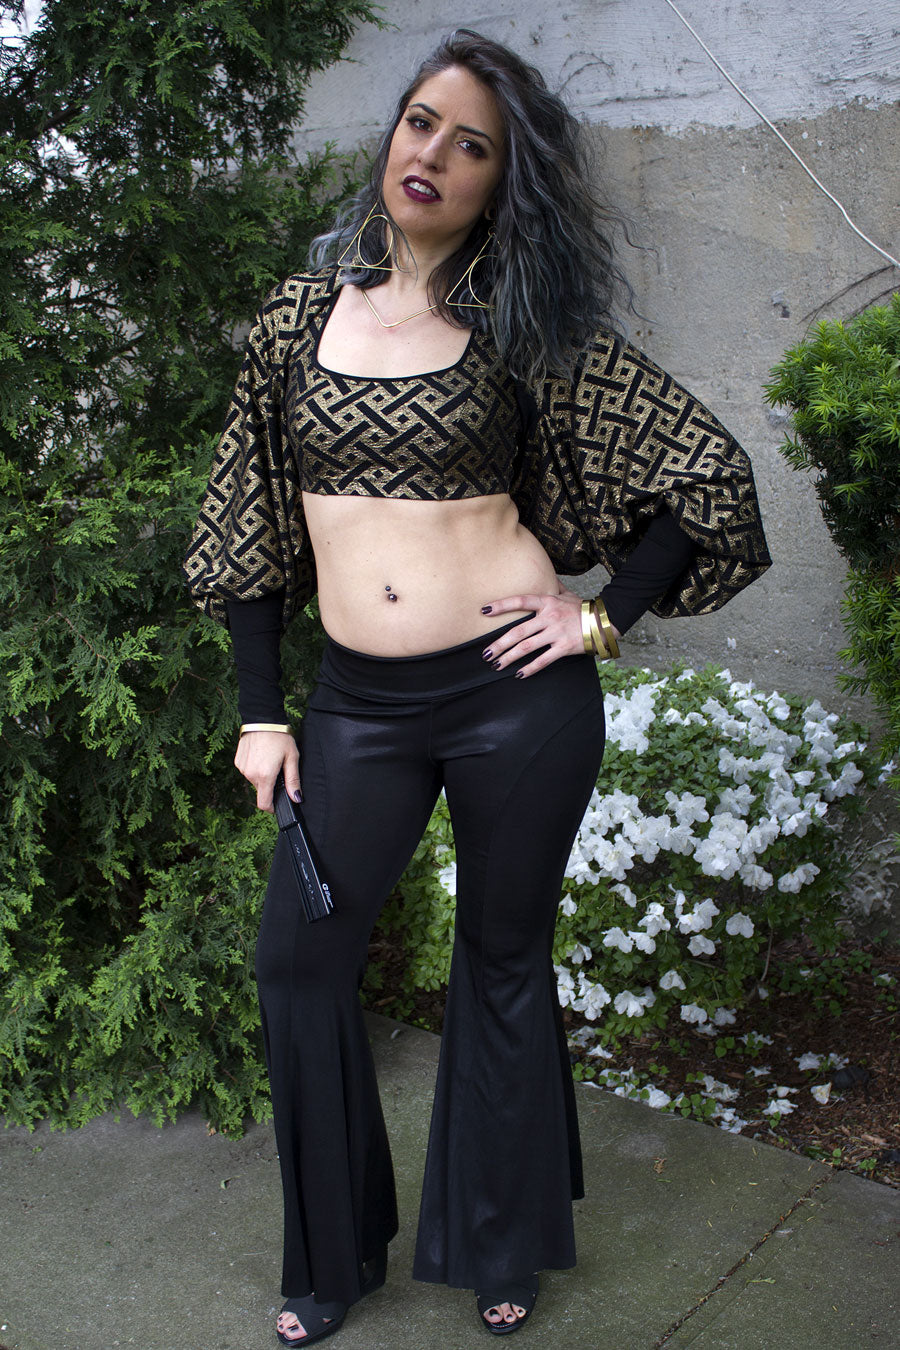 Black no muffin top 70s inspired flare bottom pants for festivals and going out